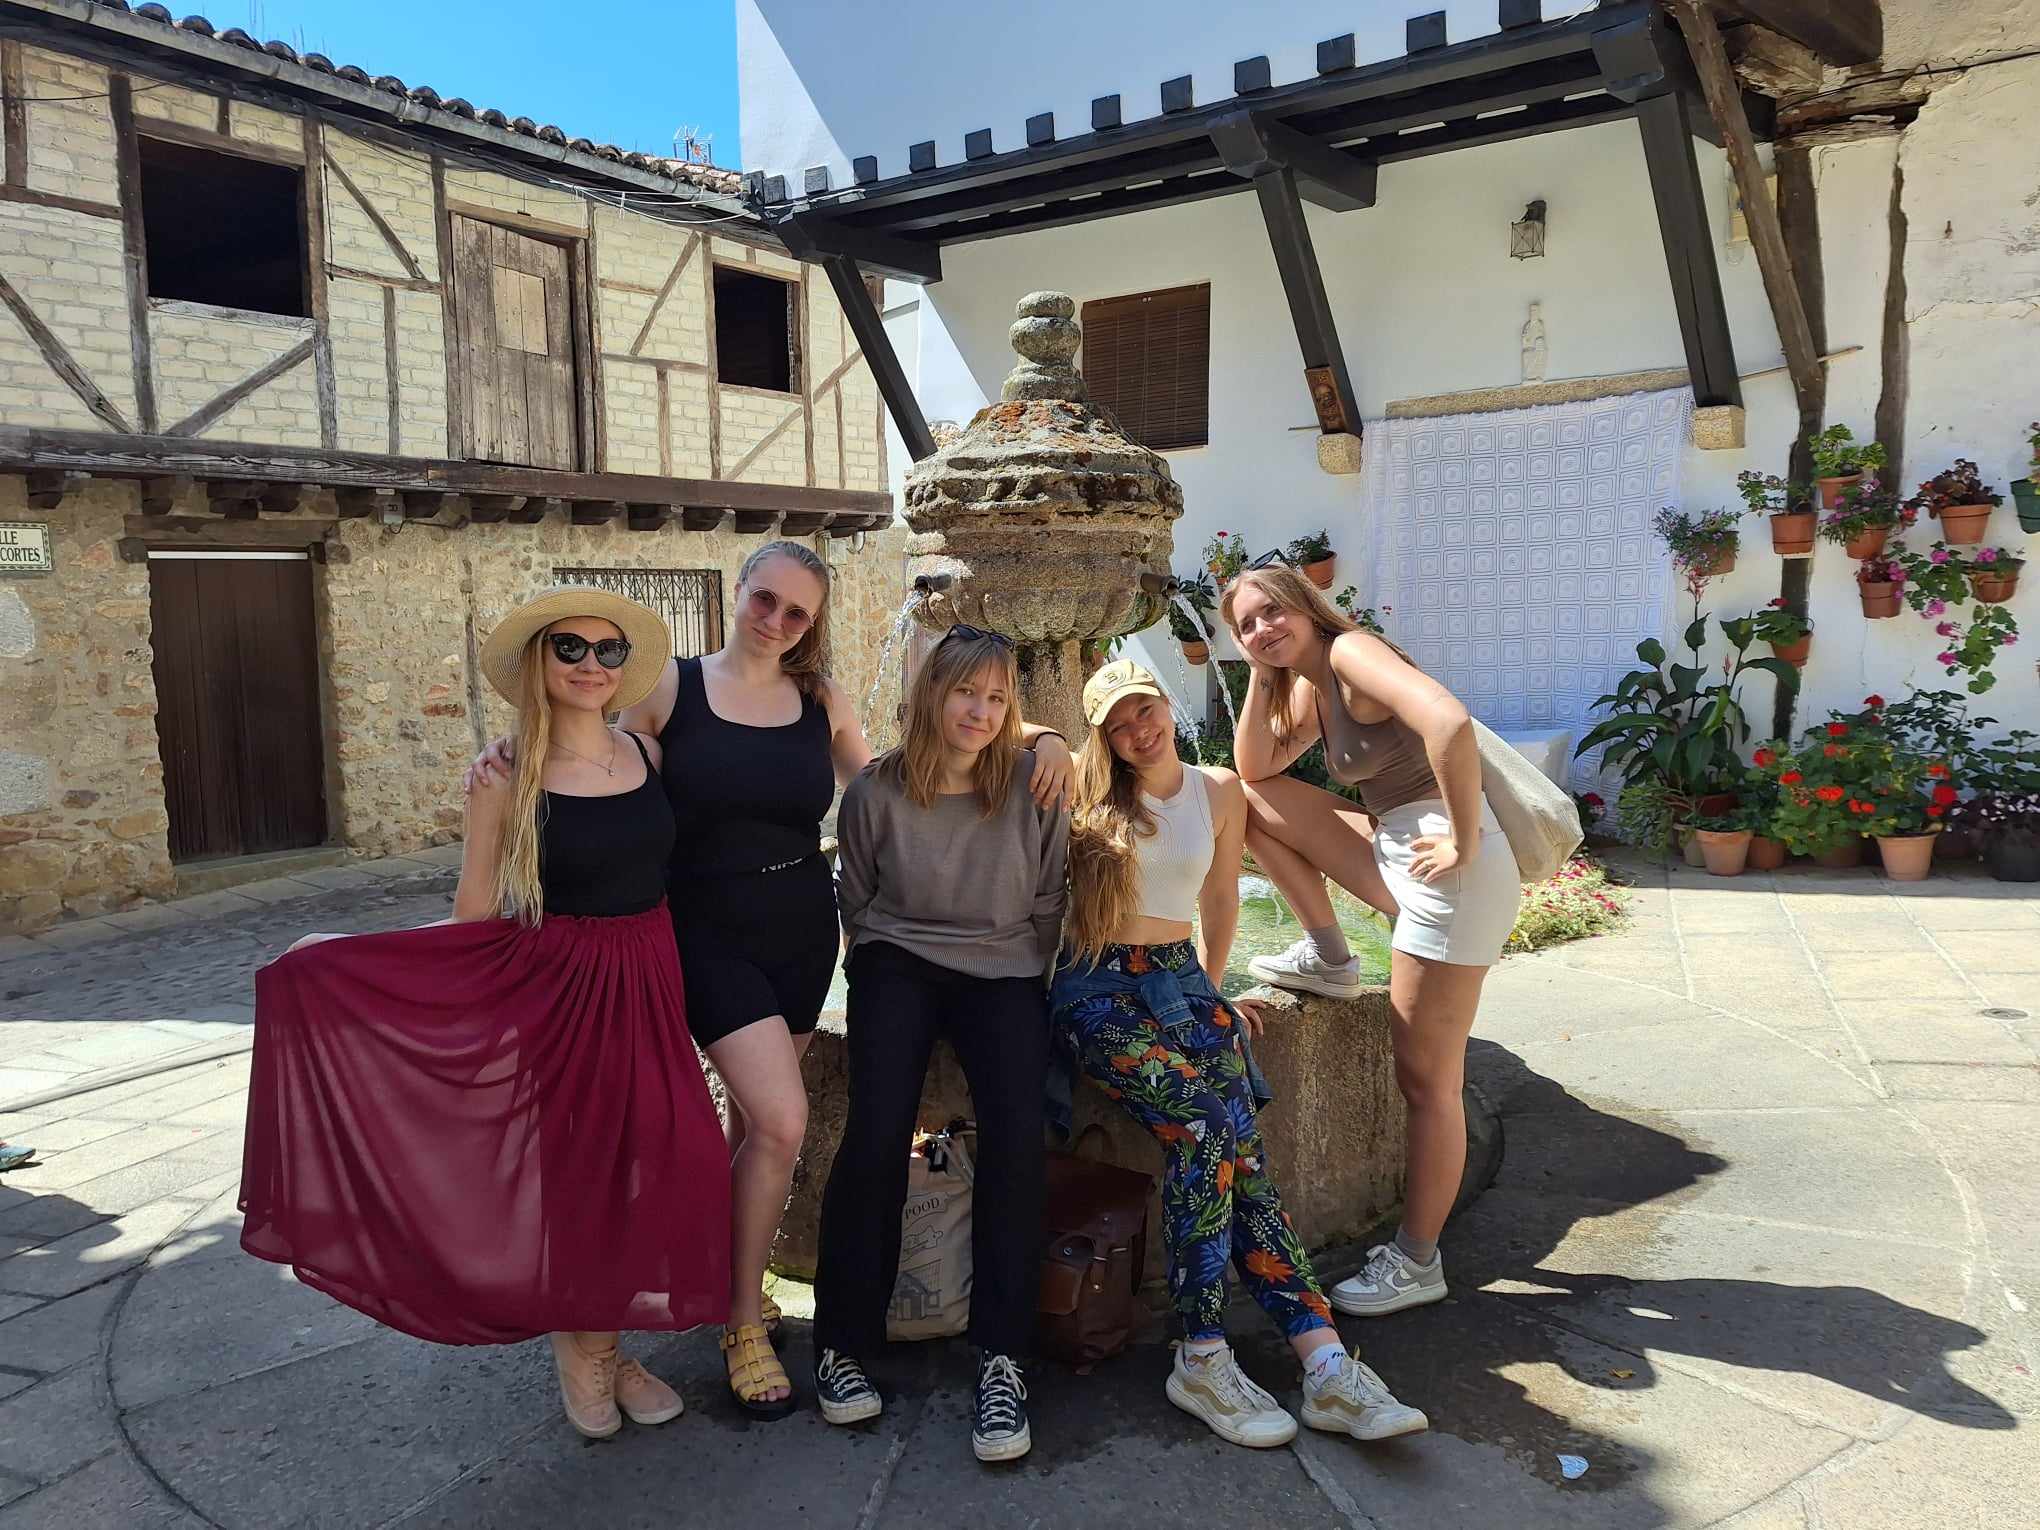 Youth Exchange Blog: Equestrian Tourism in Spain by Eliza pilt